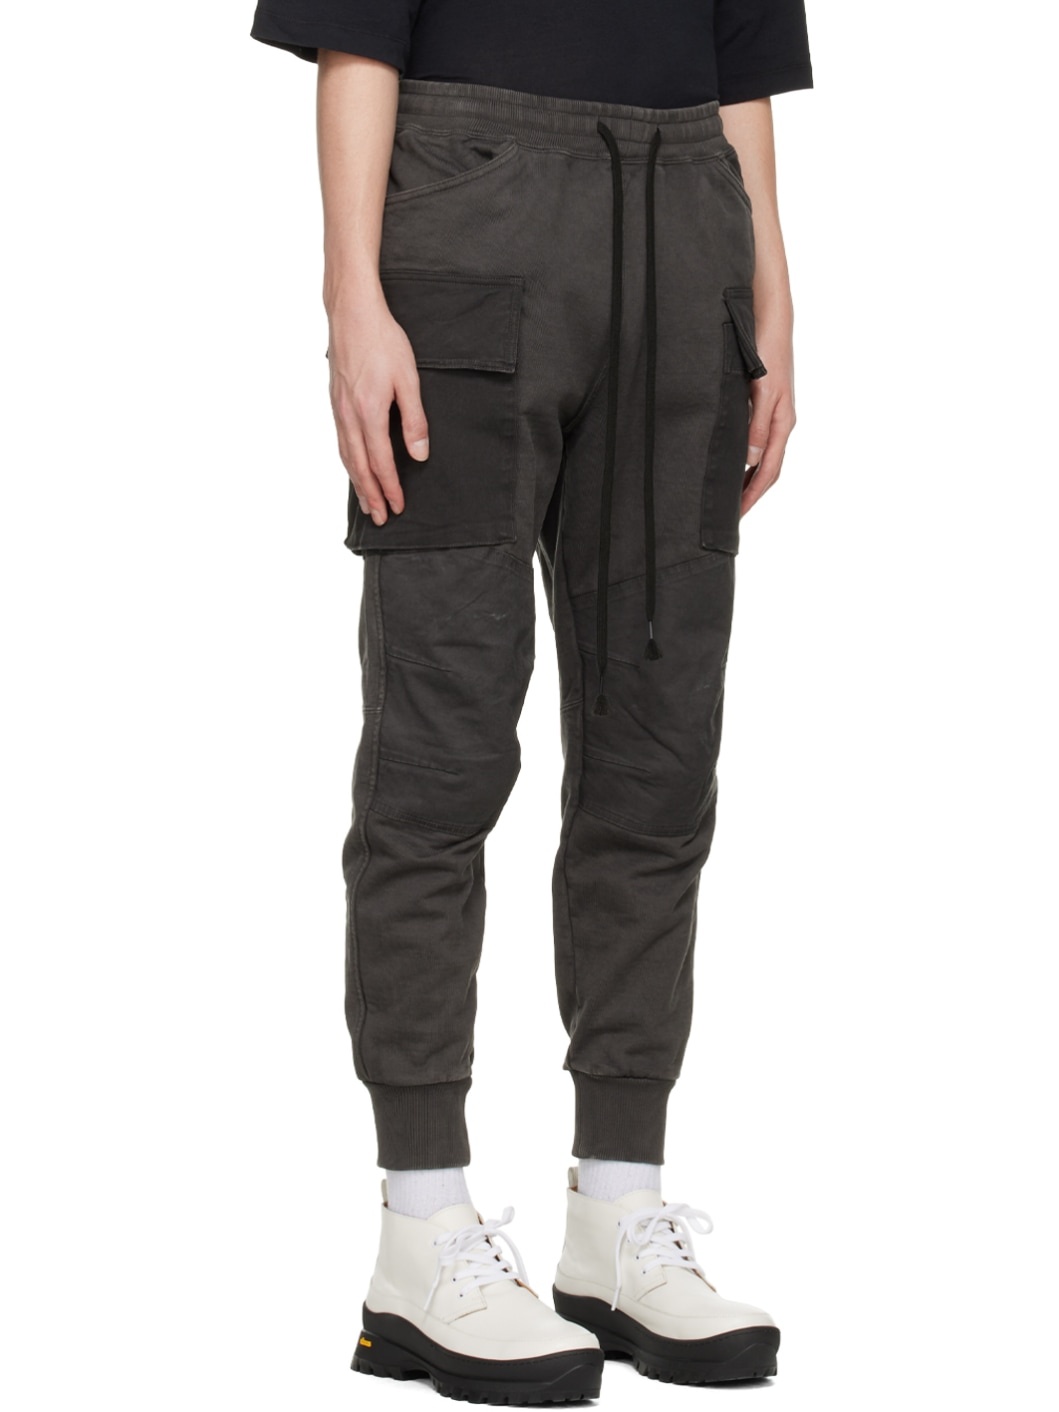 Gray Dyed Cargo Pants - 2